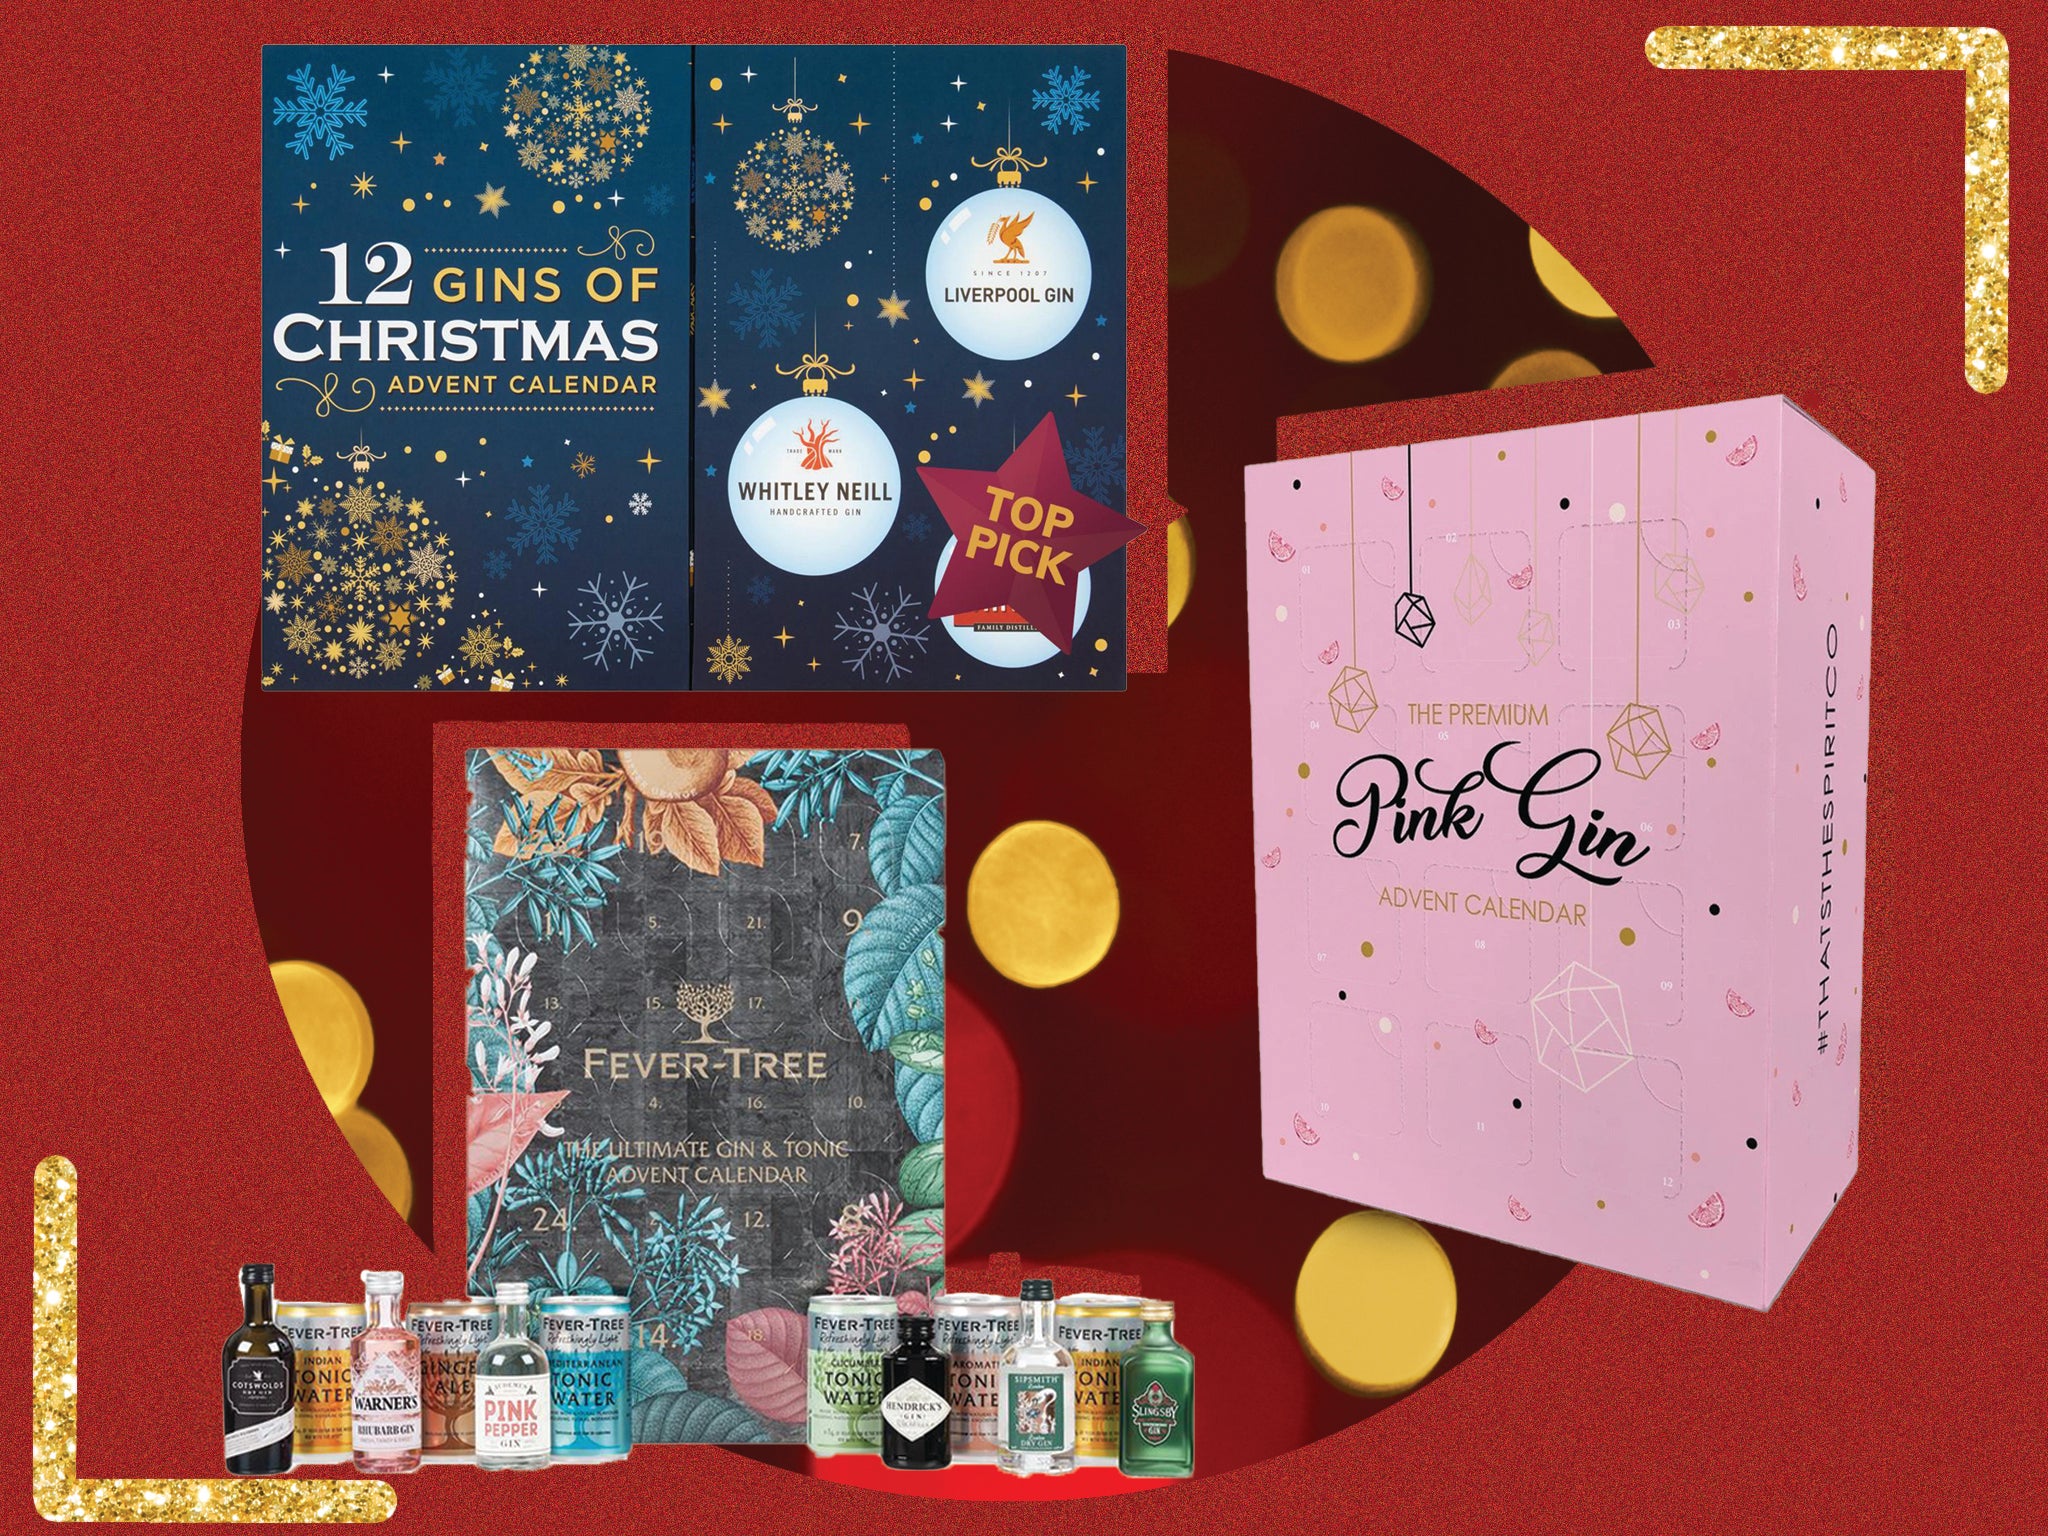 Best gin advent calendar: Have a very merry Christmas countdown